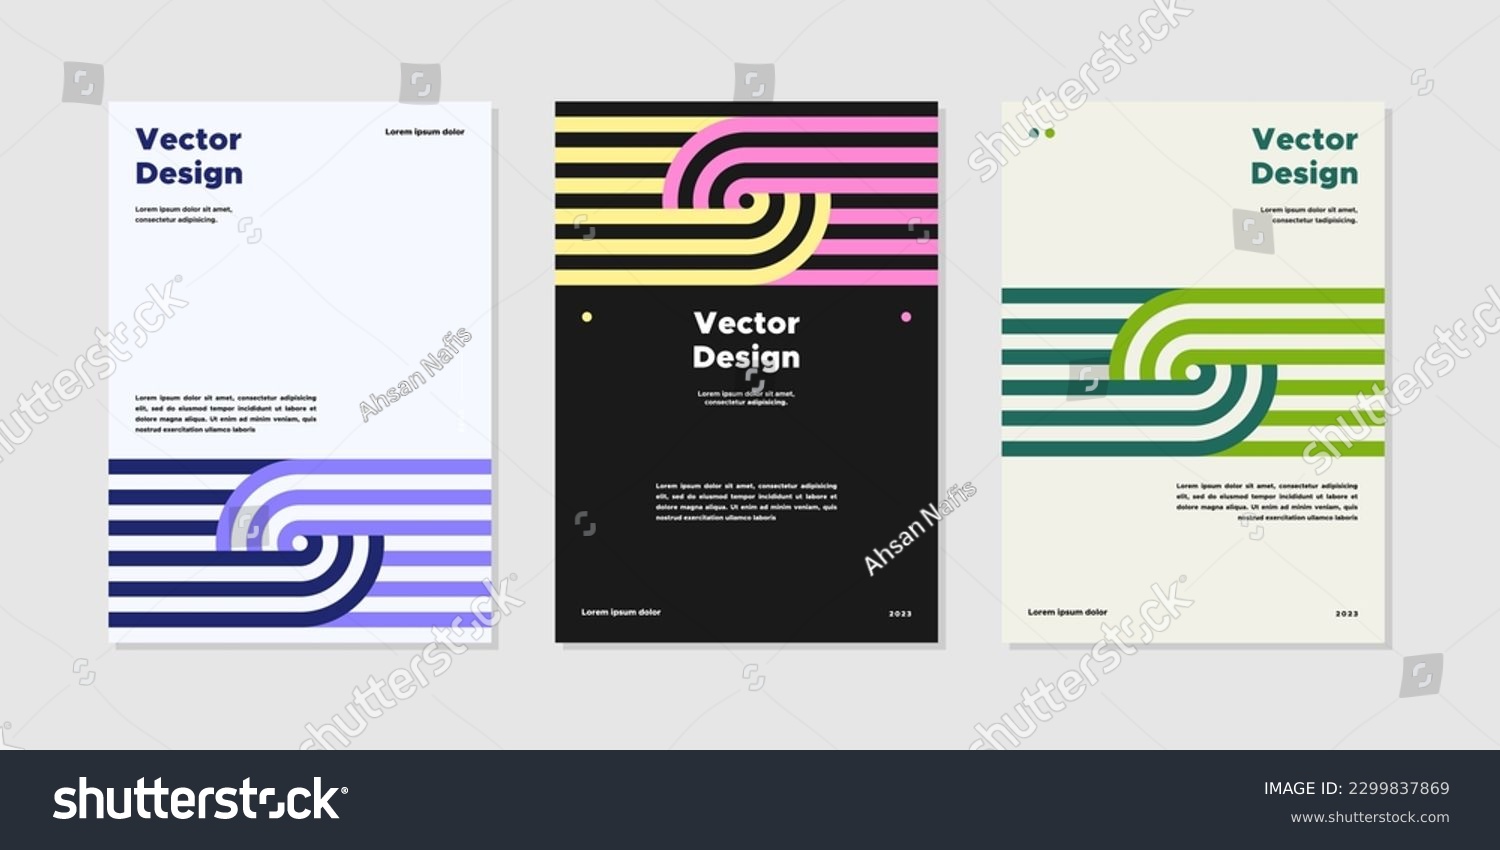 SVG of A4 Vector design layout template poster collection. Business presentation vector. Company identity brochure template. Abstract corporate report or banner cover set with dynamic shape. svg